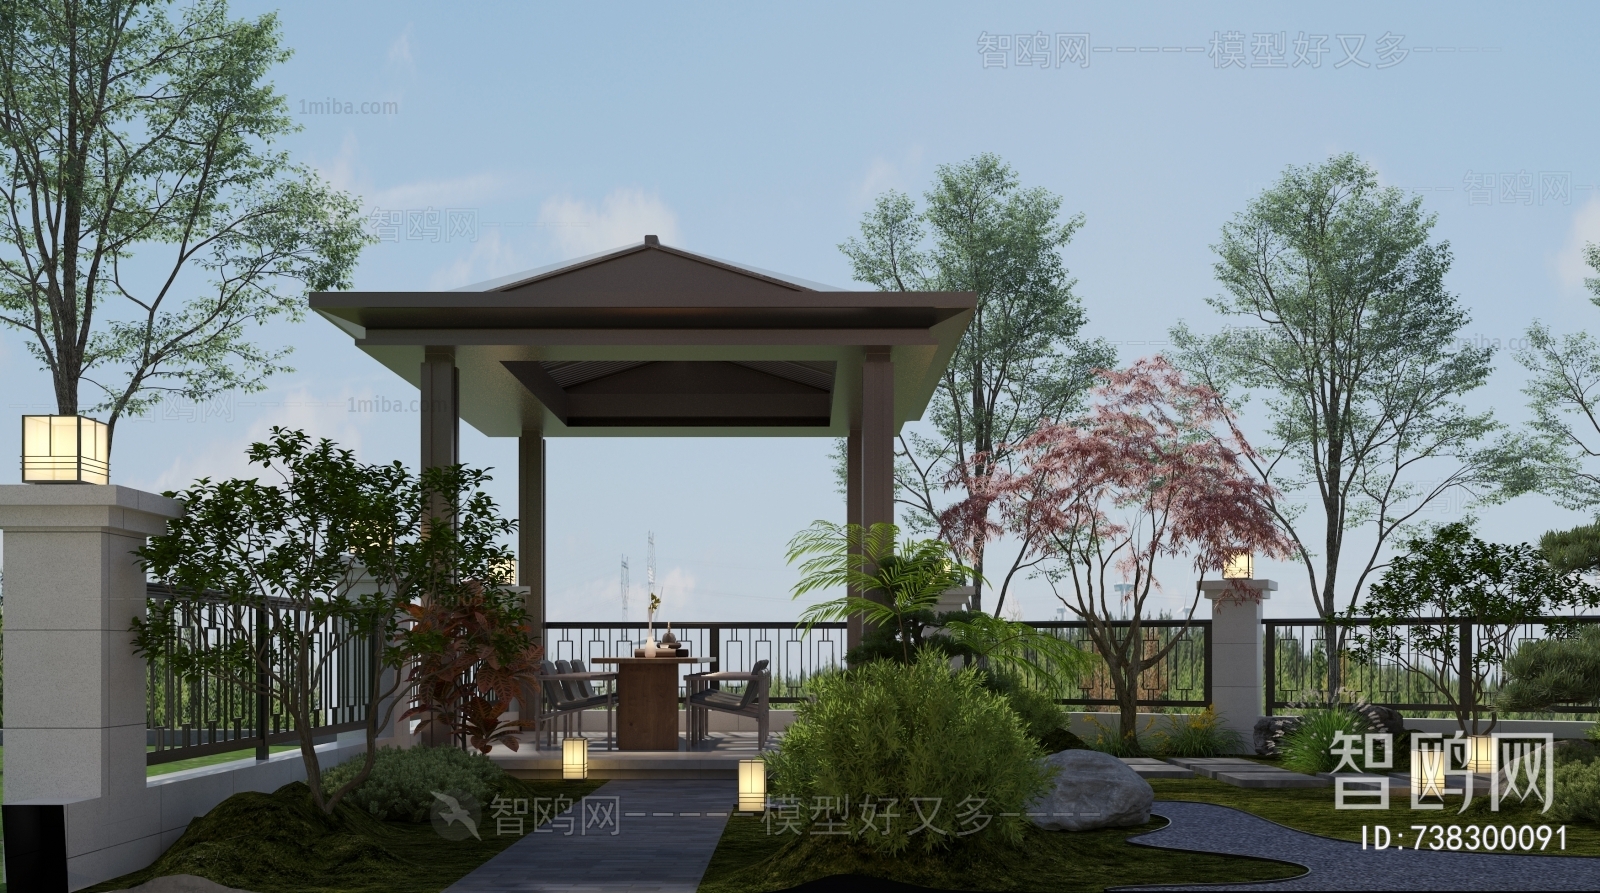 New Chinese Style Detached Villa